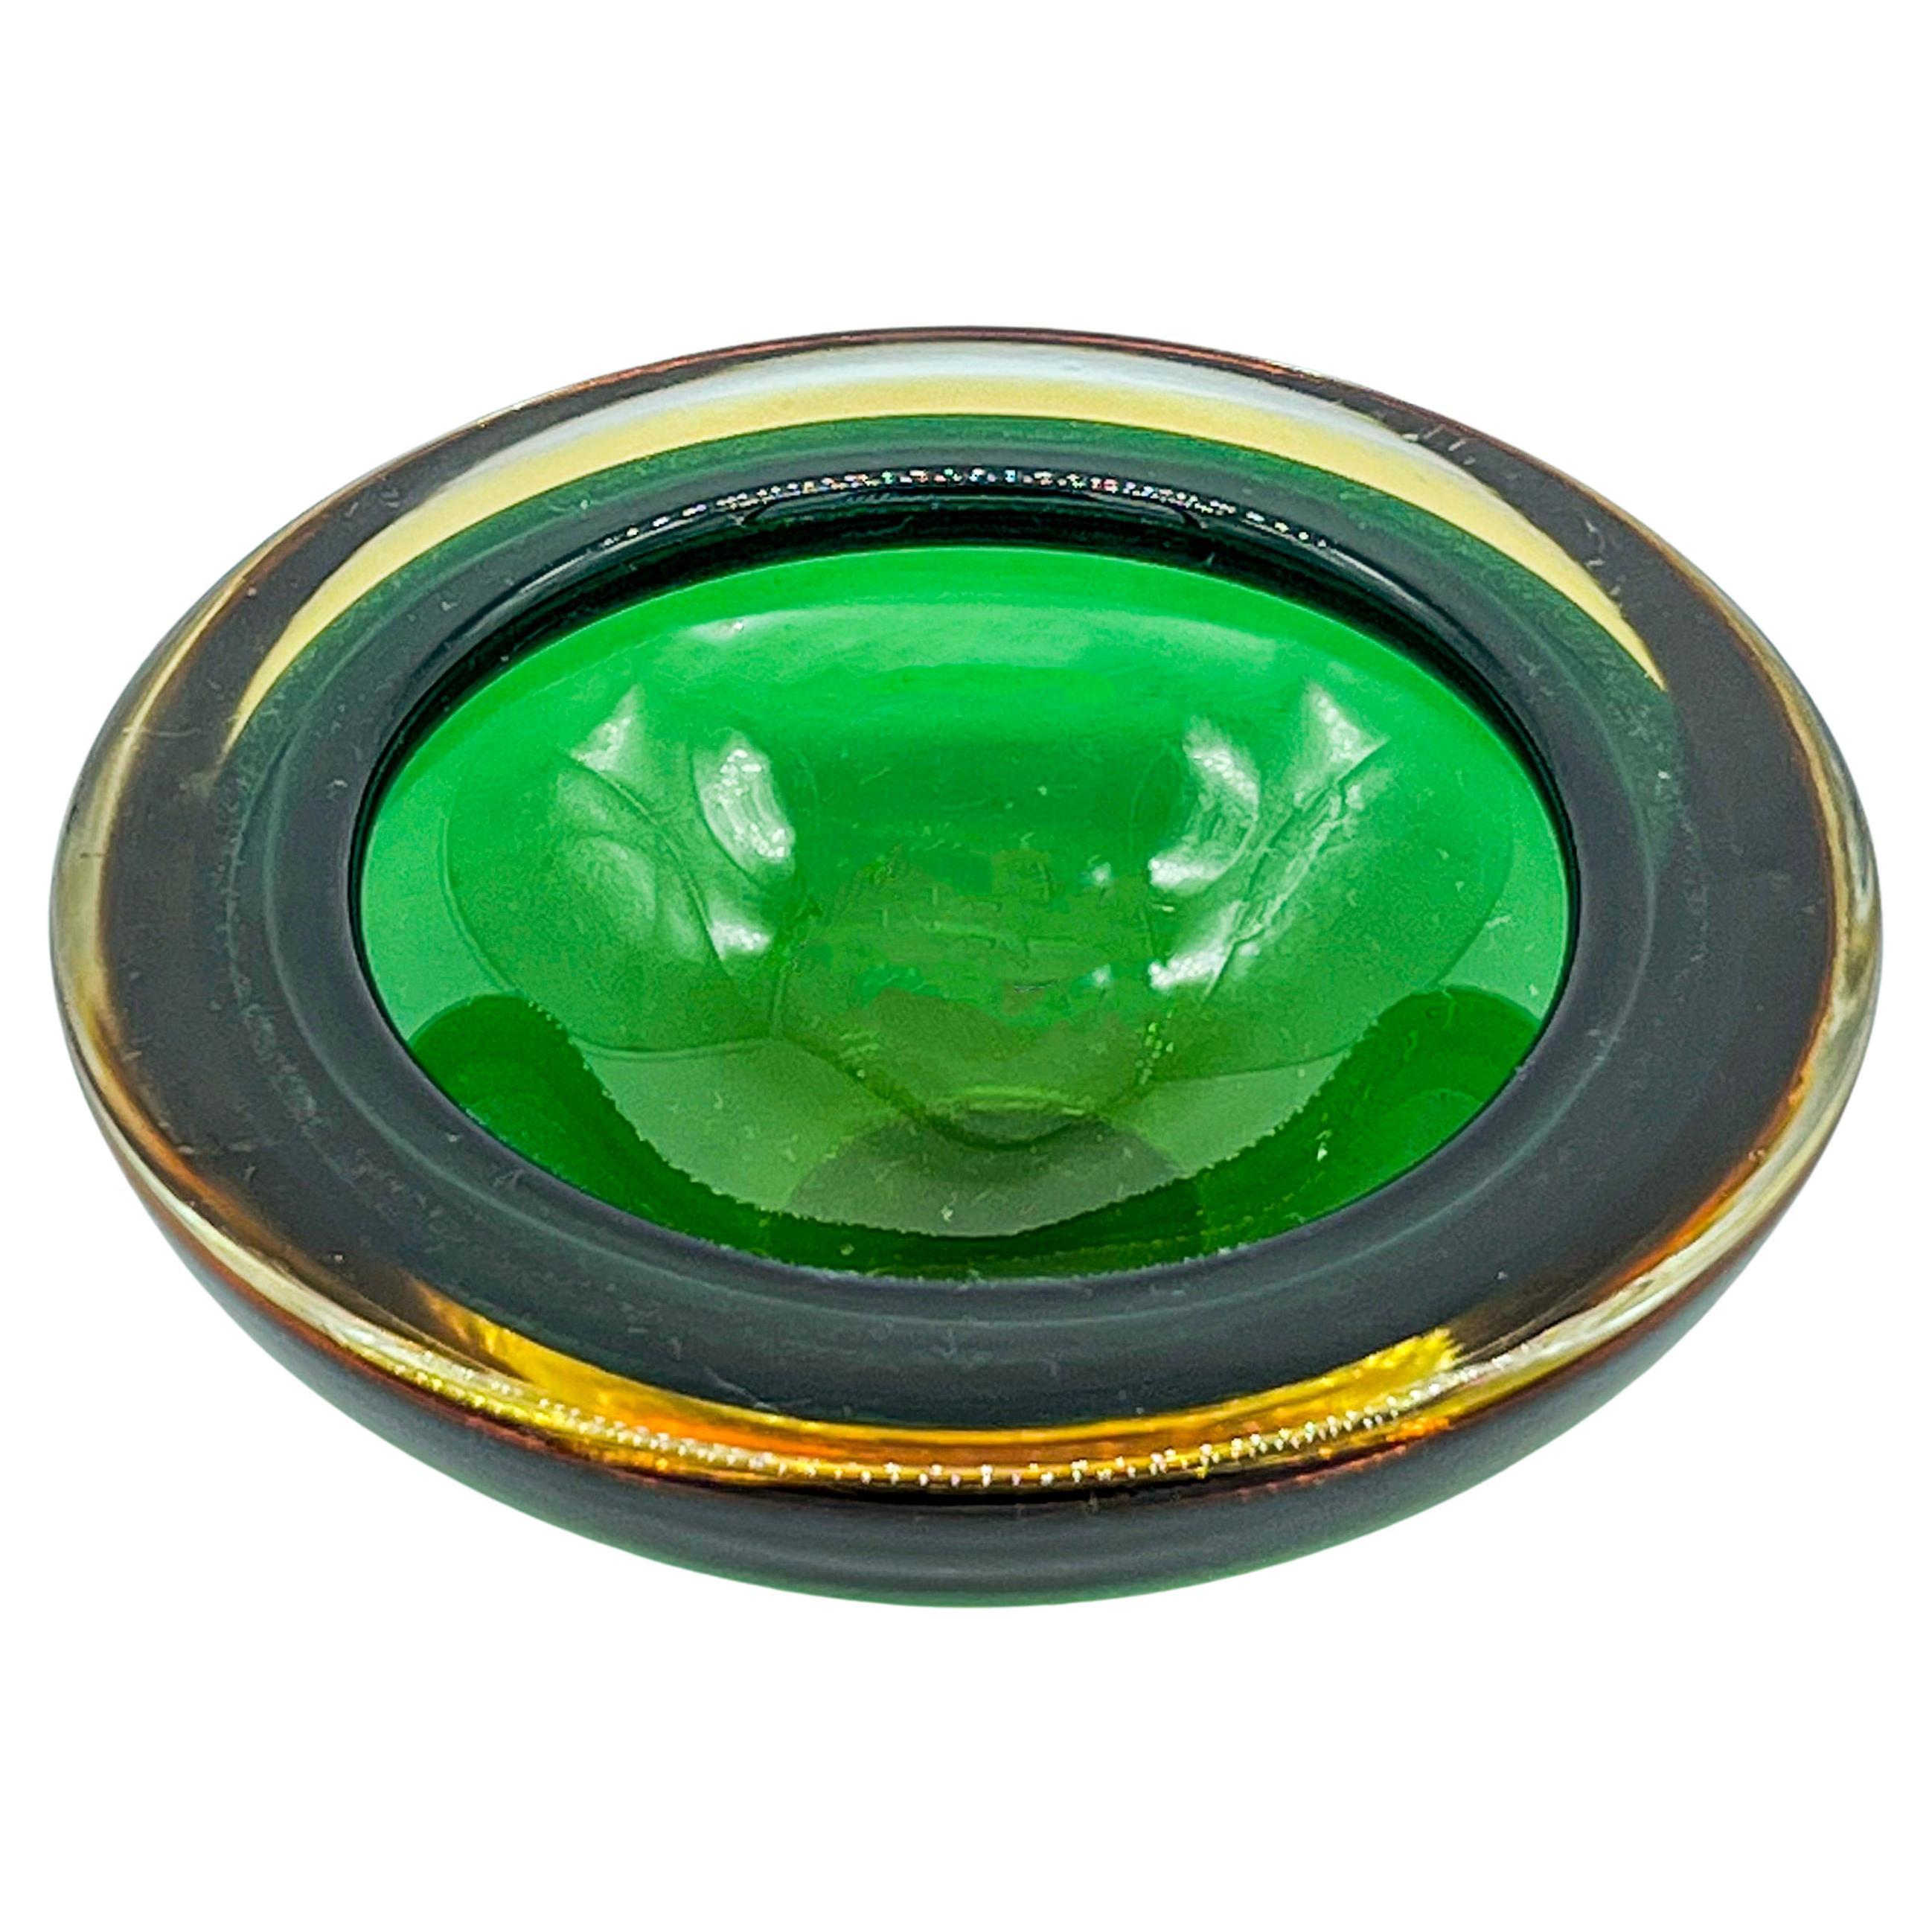 Vintage Mid-Century Modern "Sommerso" Bowl in Green and Yellow Murano Glass For Sale